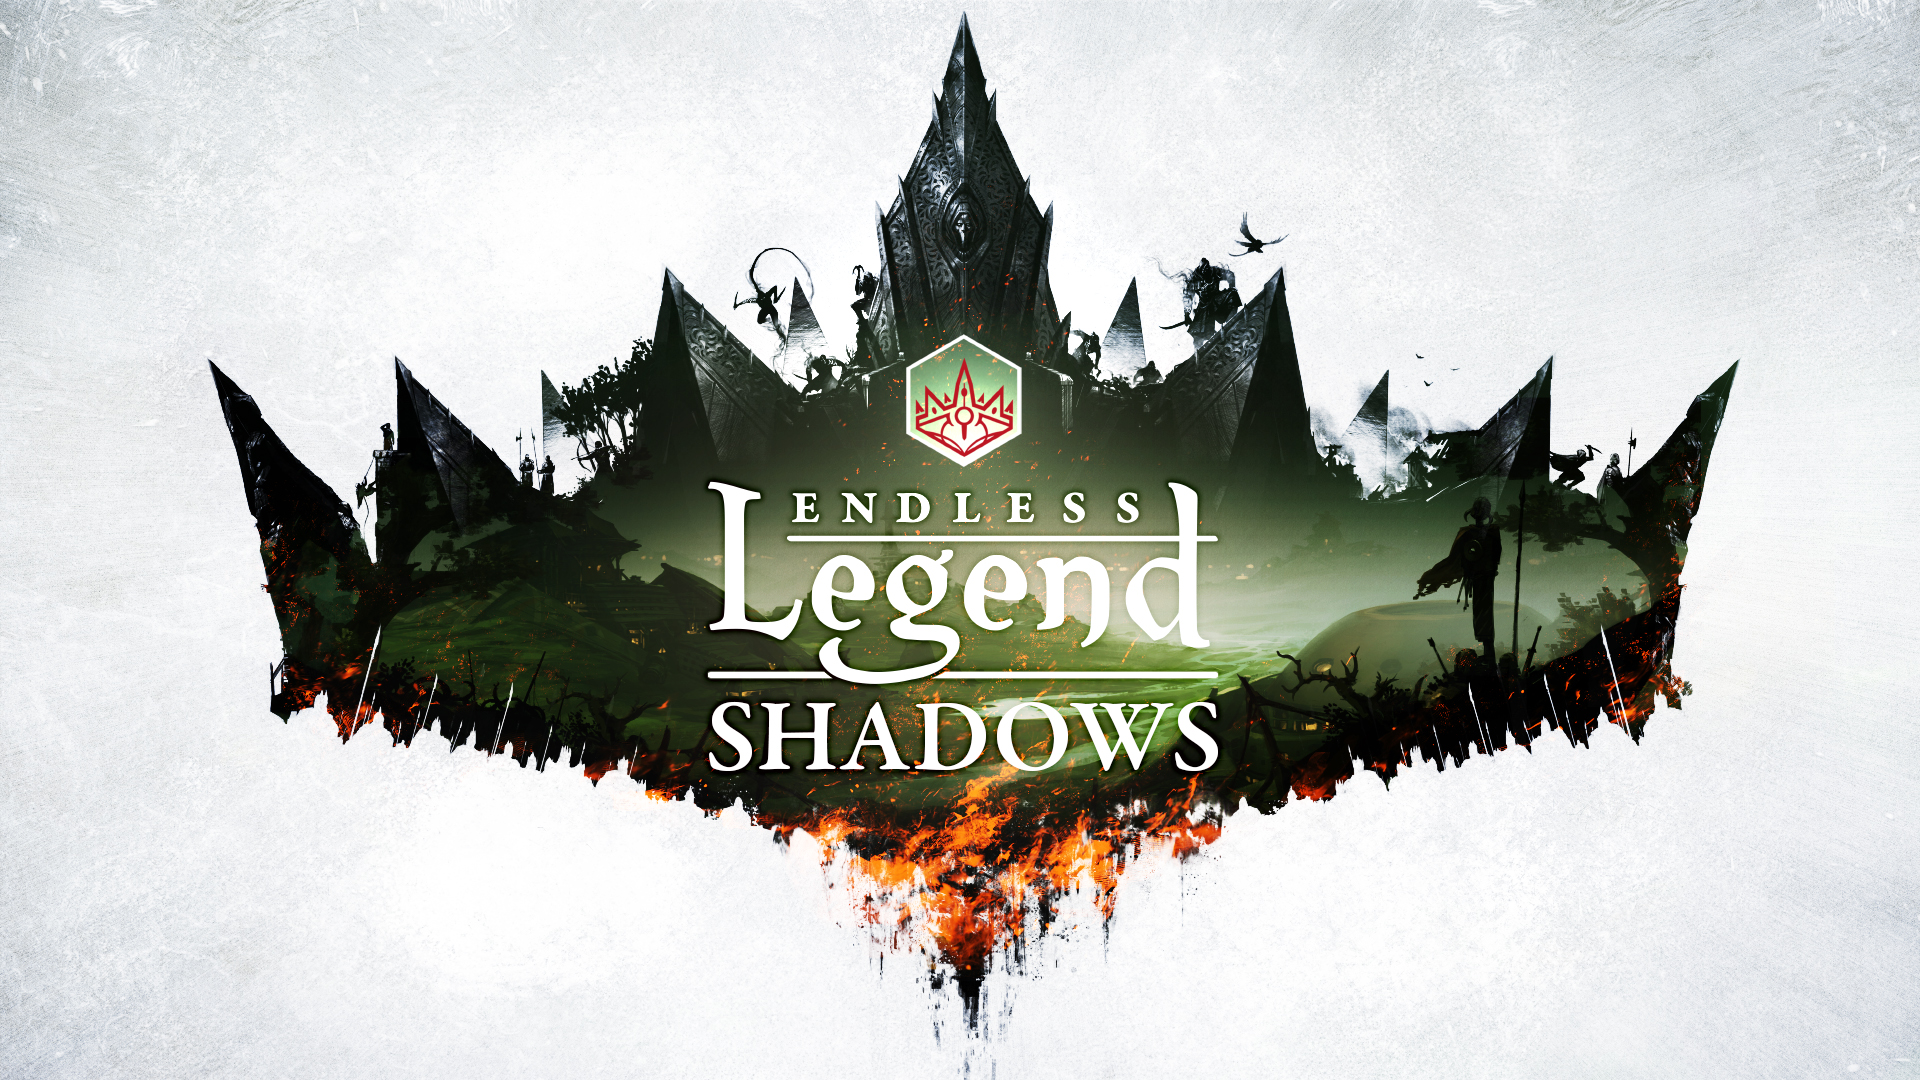 [Game PC] Endless Legend Shadows - CODEX [Indie / Strategy | 2015]